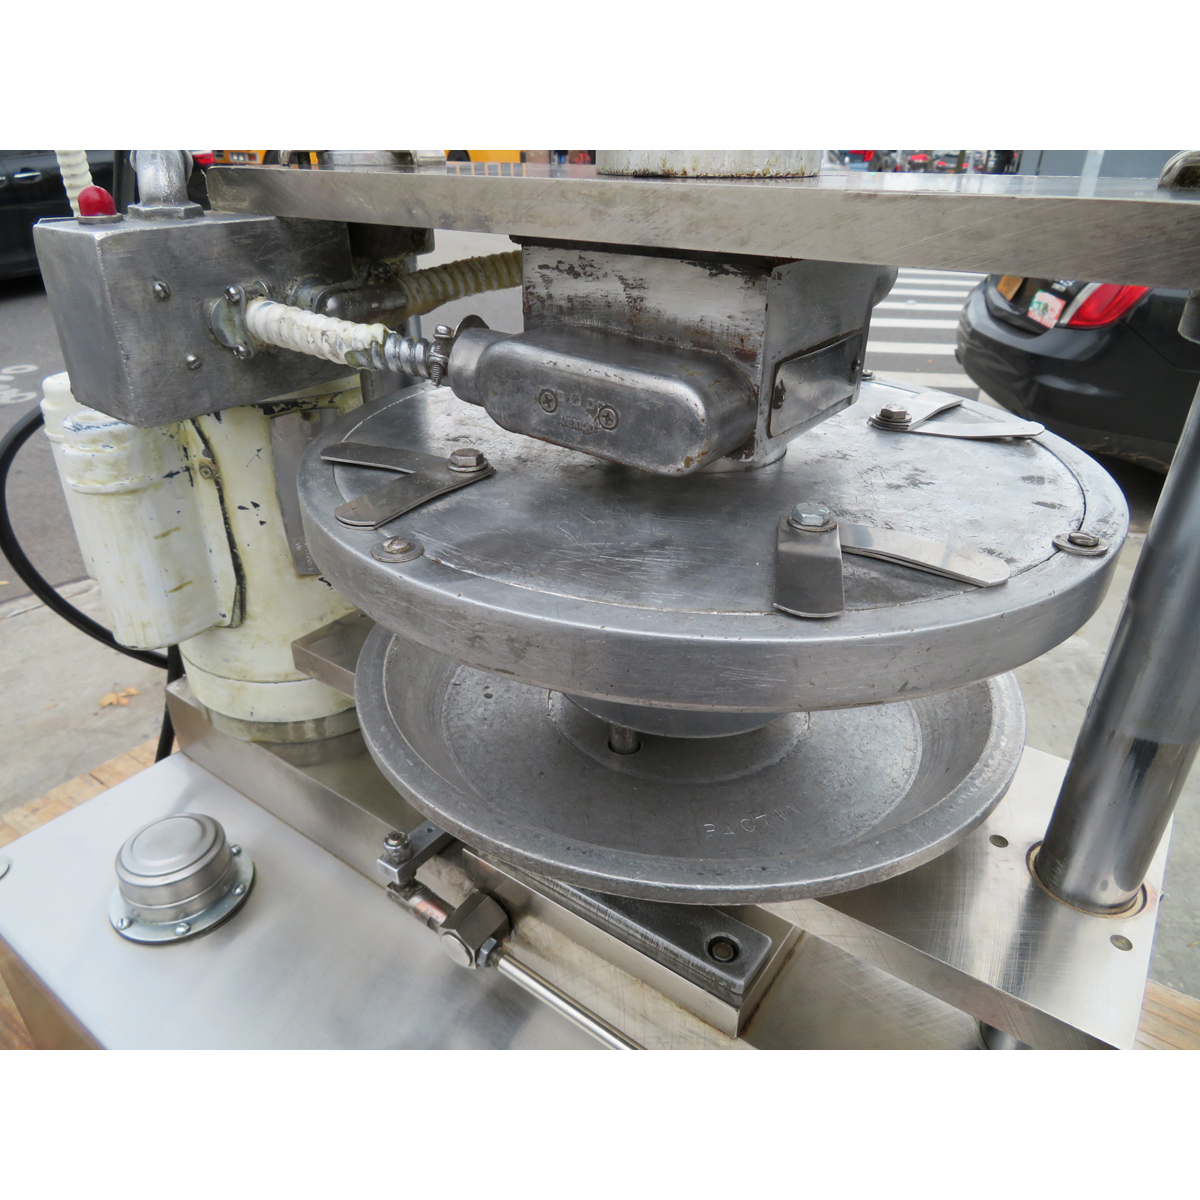 Comtec 2200 Double Pie and Pastry Crust Forming Press 11" Die, Used Good Condition image 2